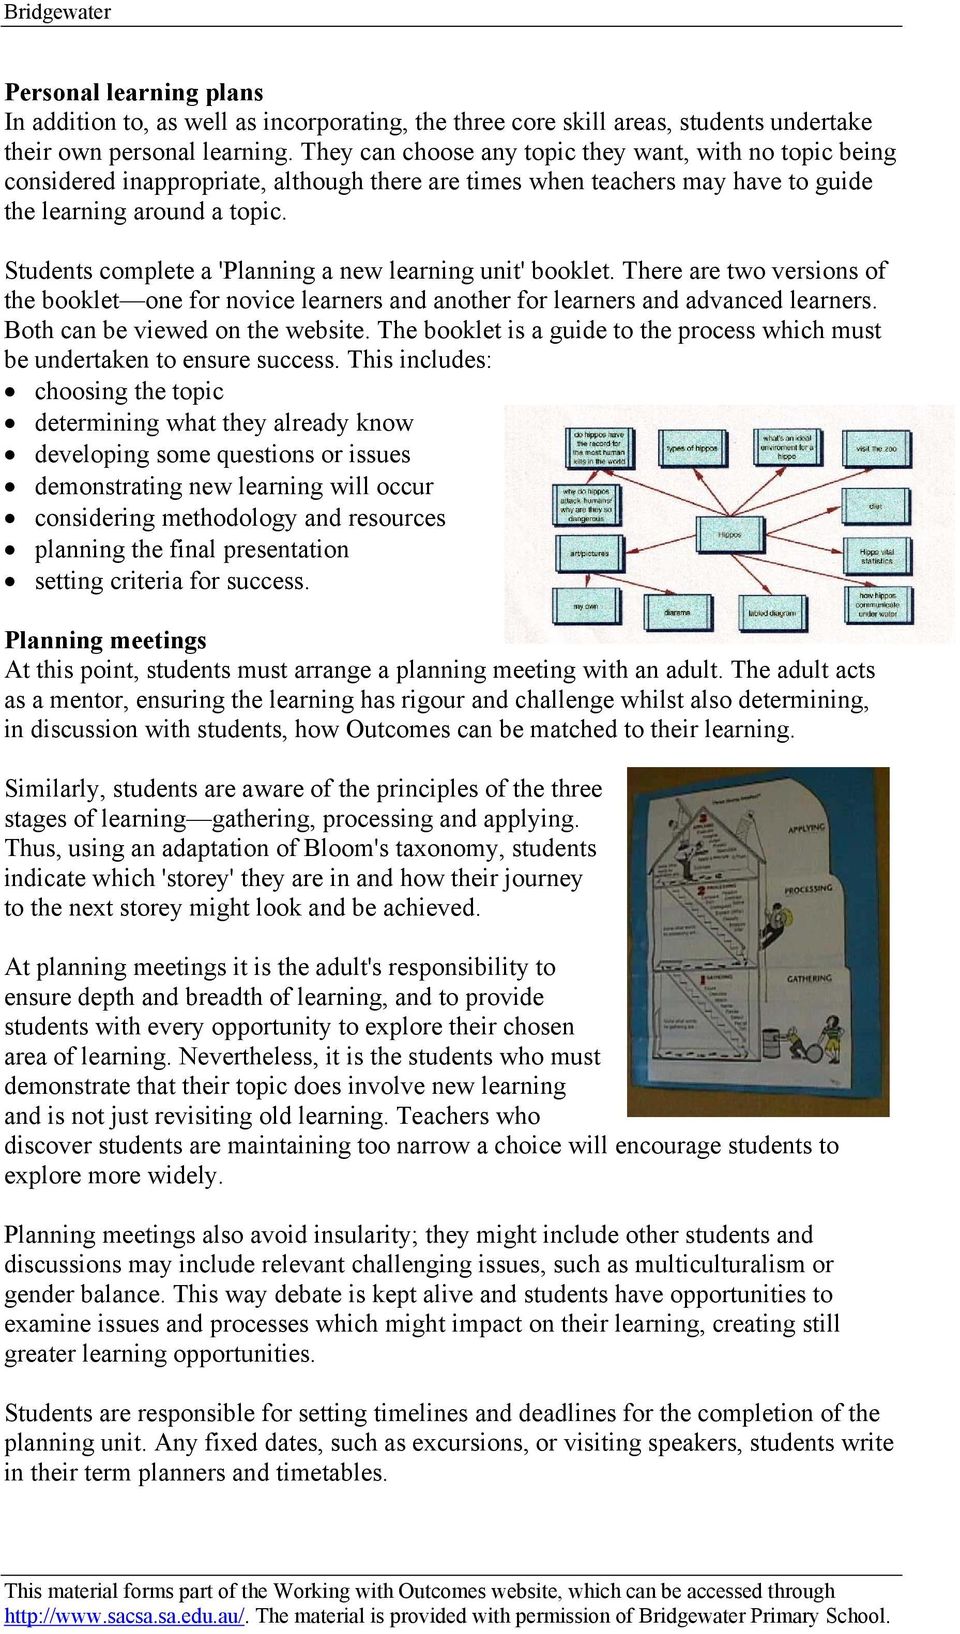 Students complete a 'Planning a new learning unit' booklet. There are two versions of the booklet one for novice learners and another for learners and advanced learners.